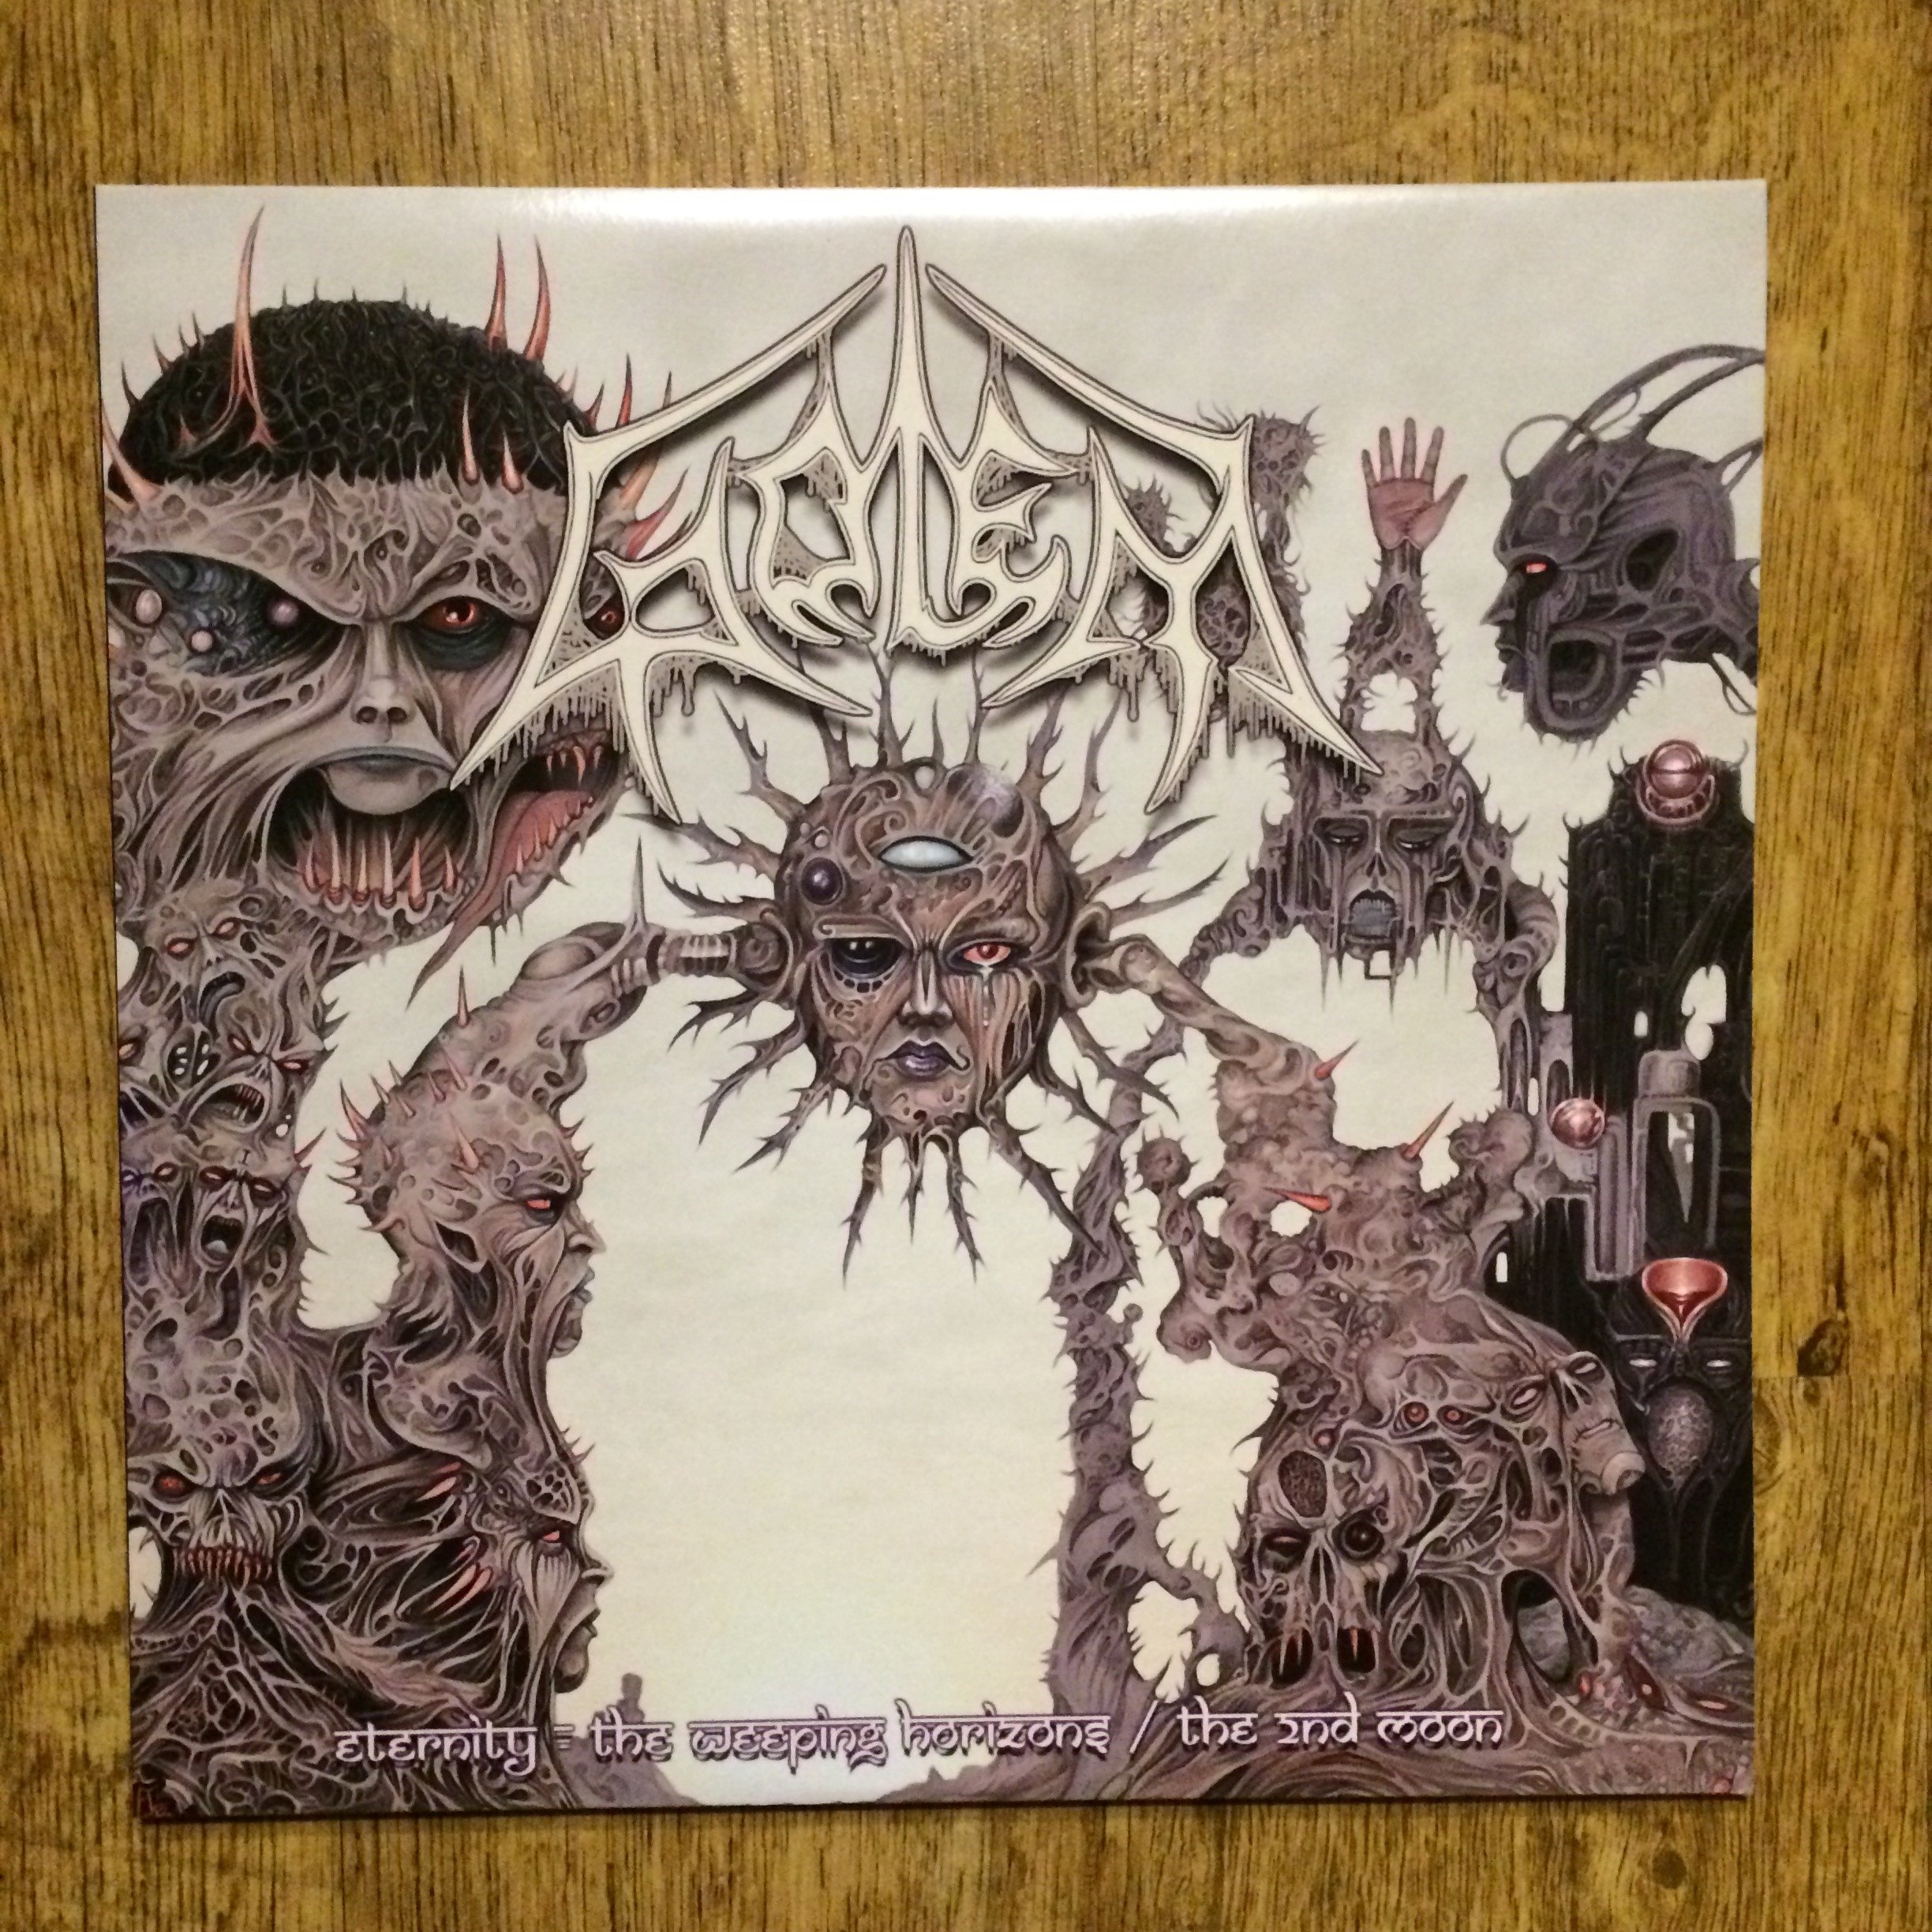 Photo of the Golem - "Eternity: The Weeping / The 2nd Moon" 2LP